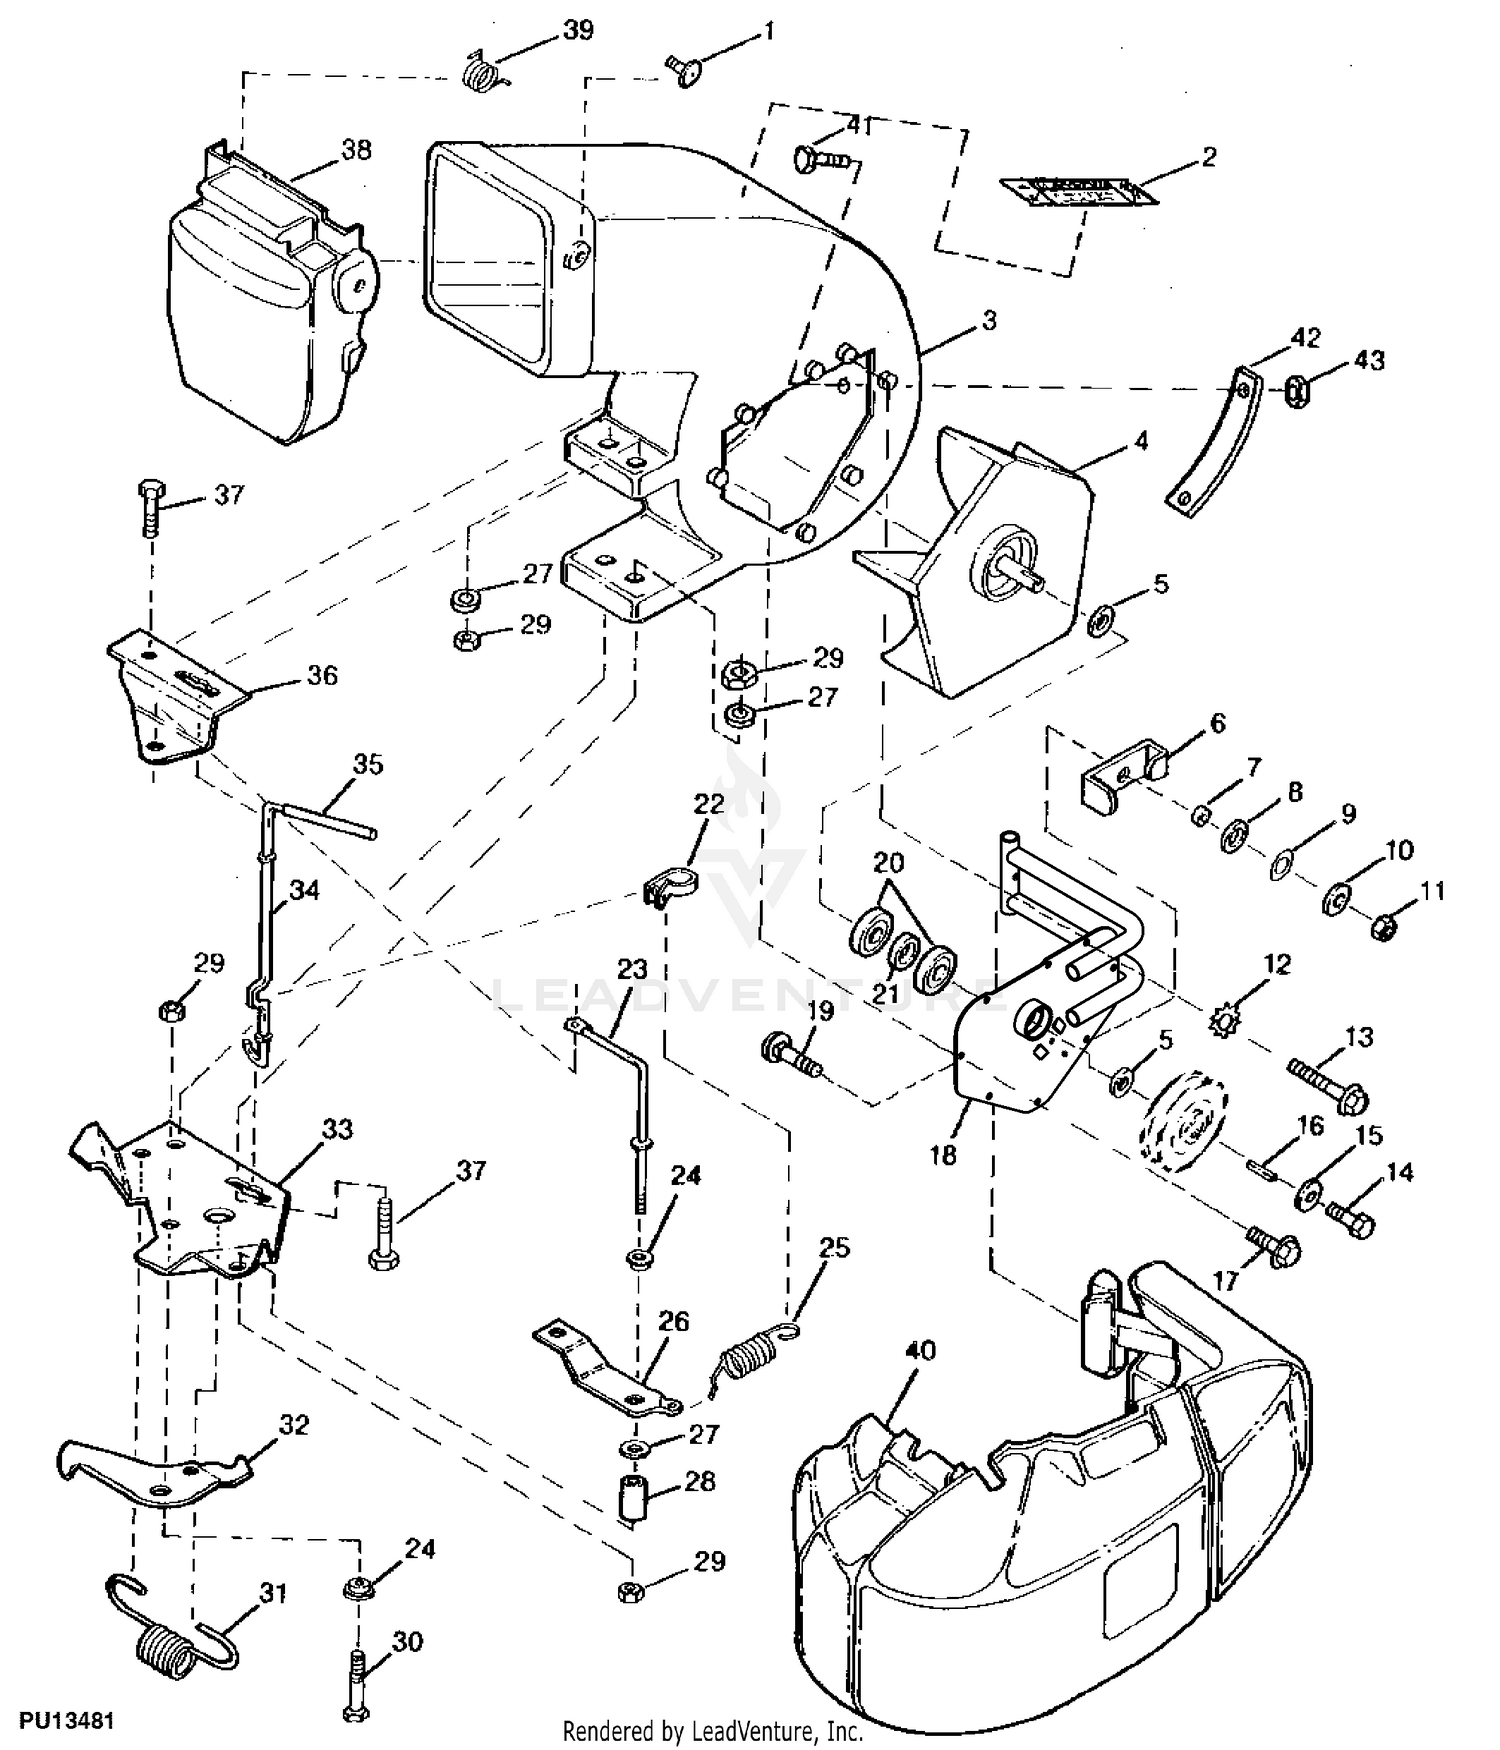 John Deere Power Flow Material Collection System (60-IN Mower Deck) -PC2111  BLOWER HOUSING,BRACKETS & ROTOR: POWER FLOW BLOWER ASSEMBLY 60 MOWER